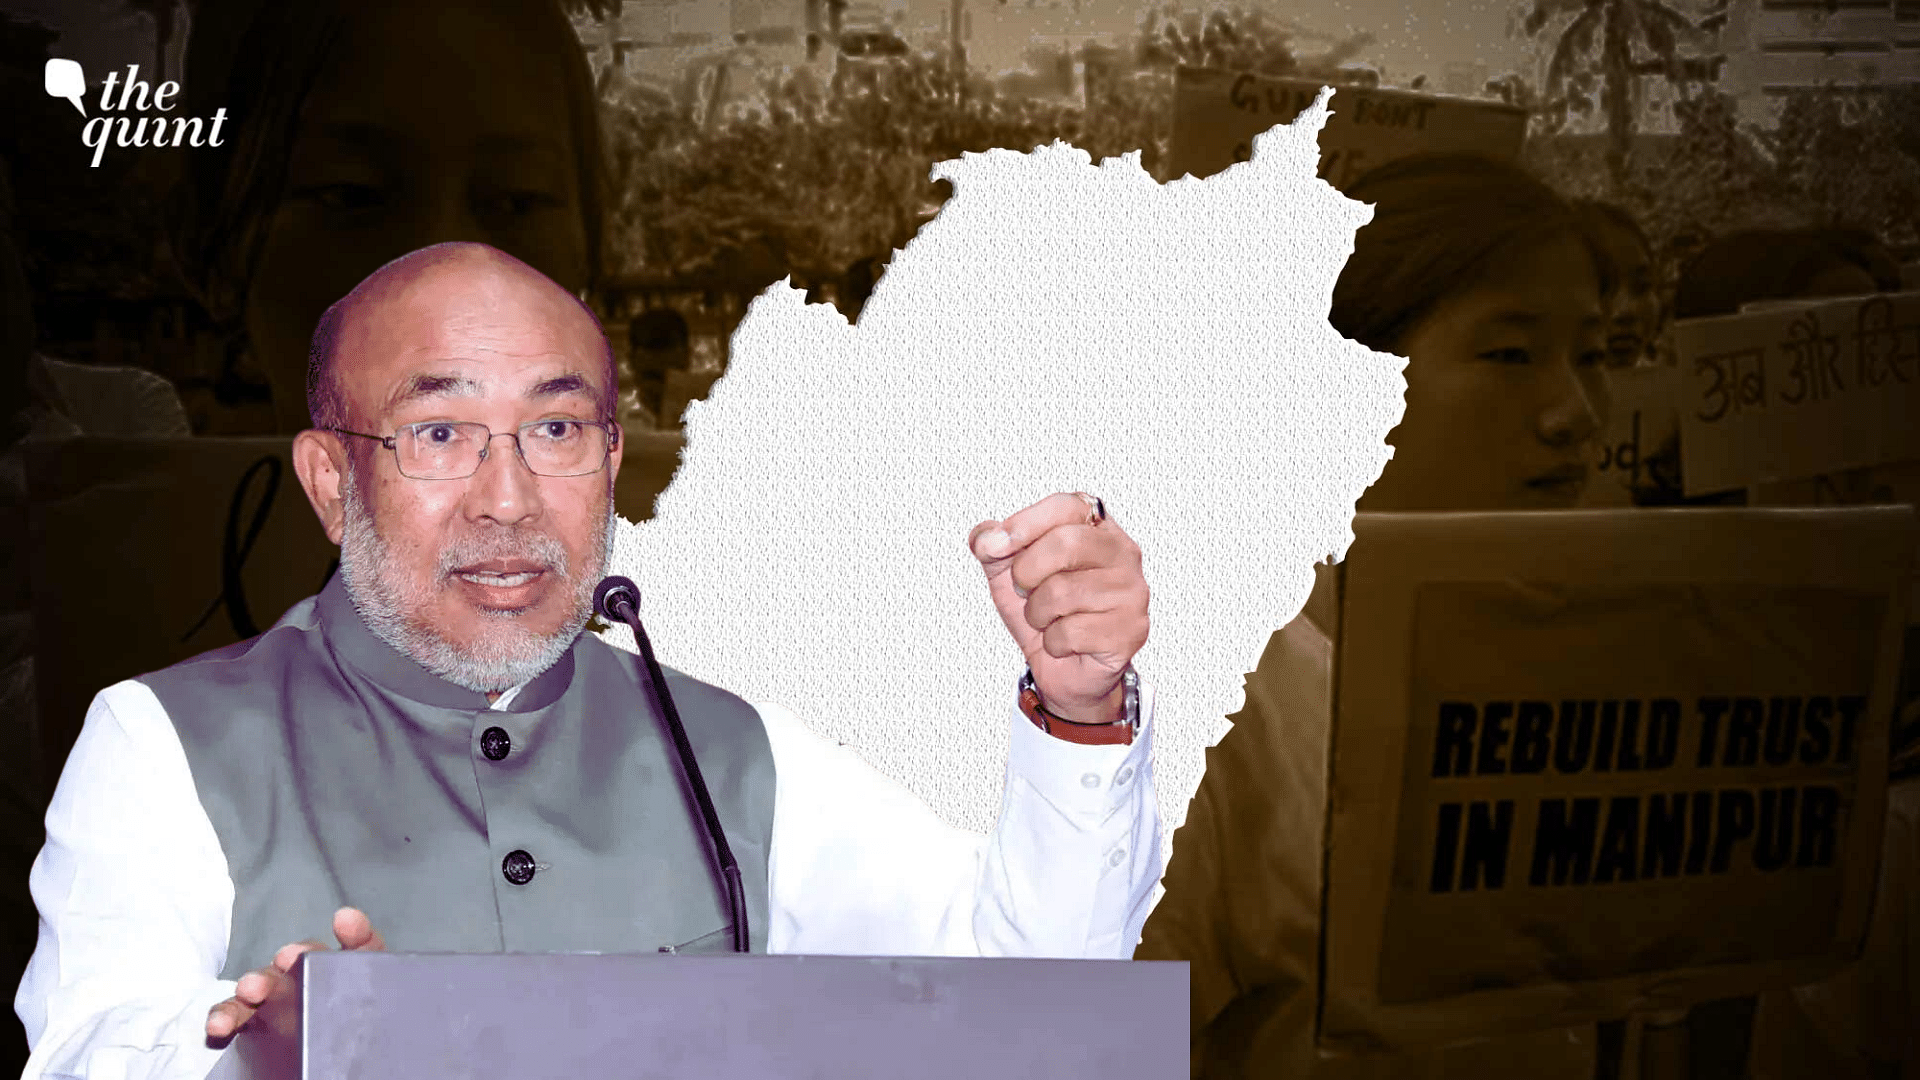 <div class="paragraphs"><p>Over two months, there have been various demands have been proposed, ranging from the removal of<a href="https://www.thequint.com/topic/manipur-chief-minister-n-biren-singh"> Chief Minister N Biren Singh's</a> to a separate administration for the tribal areas and the valley to Manipur being brought under <a href="https://www.thequint.com/topic/president-s-rule">President's rule</a>, to bring about peace in the state.</p></div>